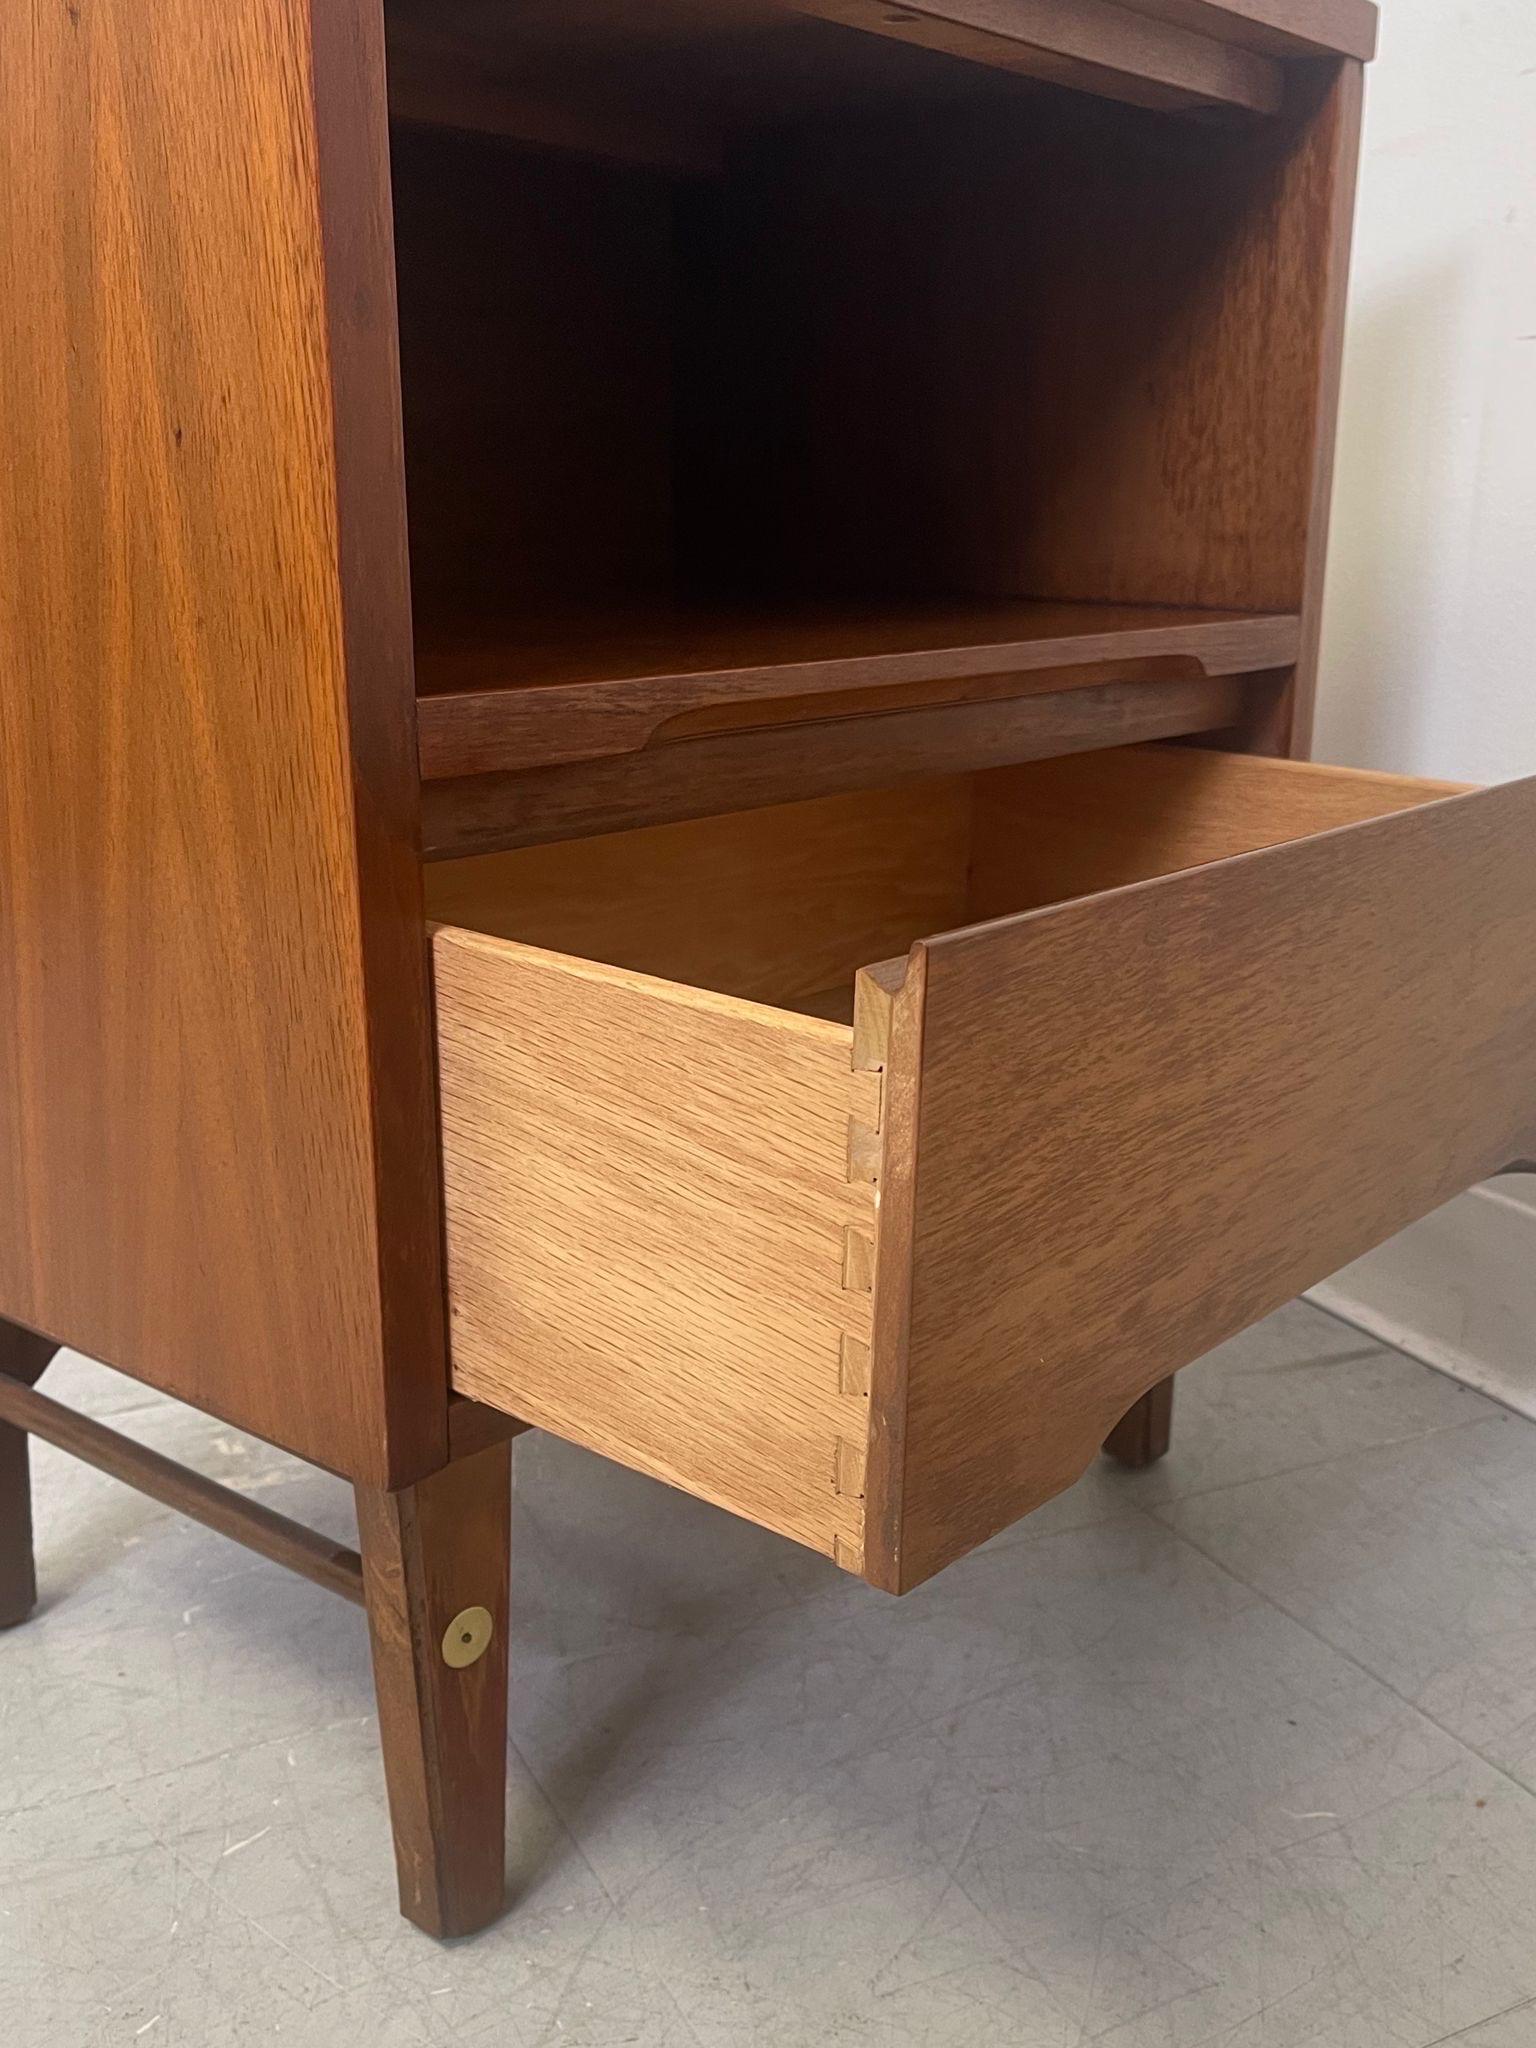 Late 20th Century Vintage Mid Century Modern Walnut Toned End Table by Stanley Furniture Co. For Sale